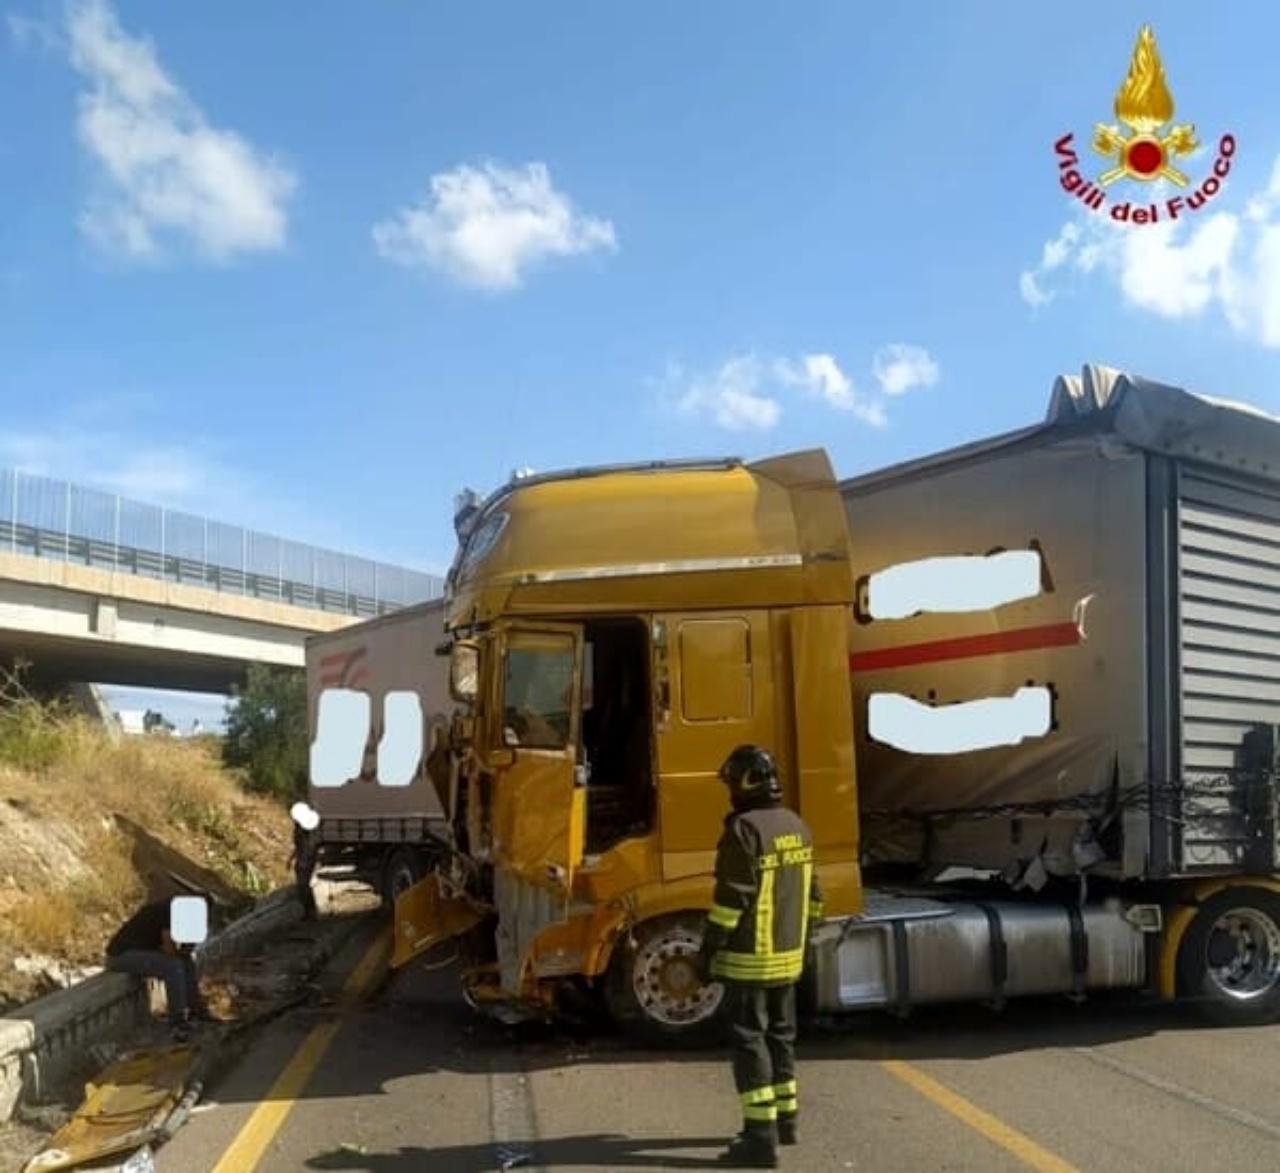 Two workers died in accident in the Brindisi area